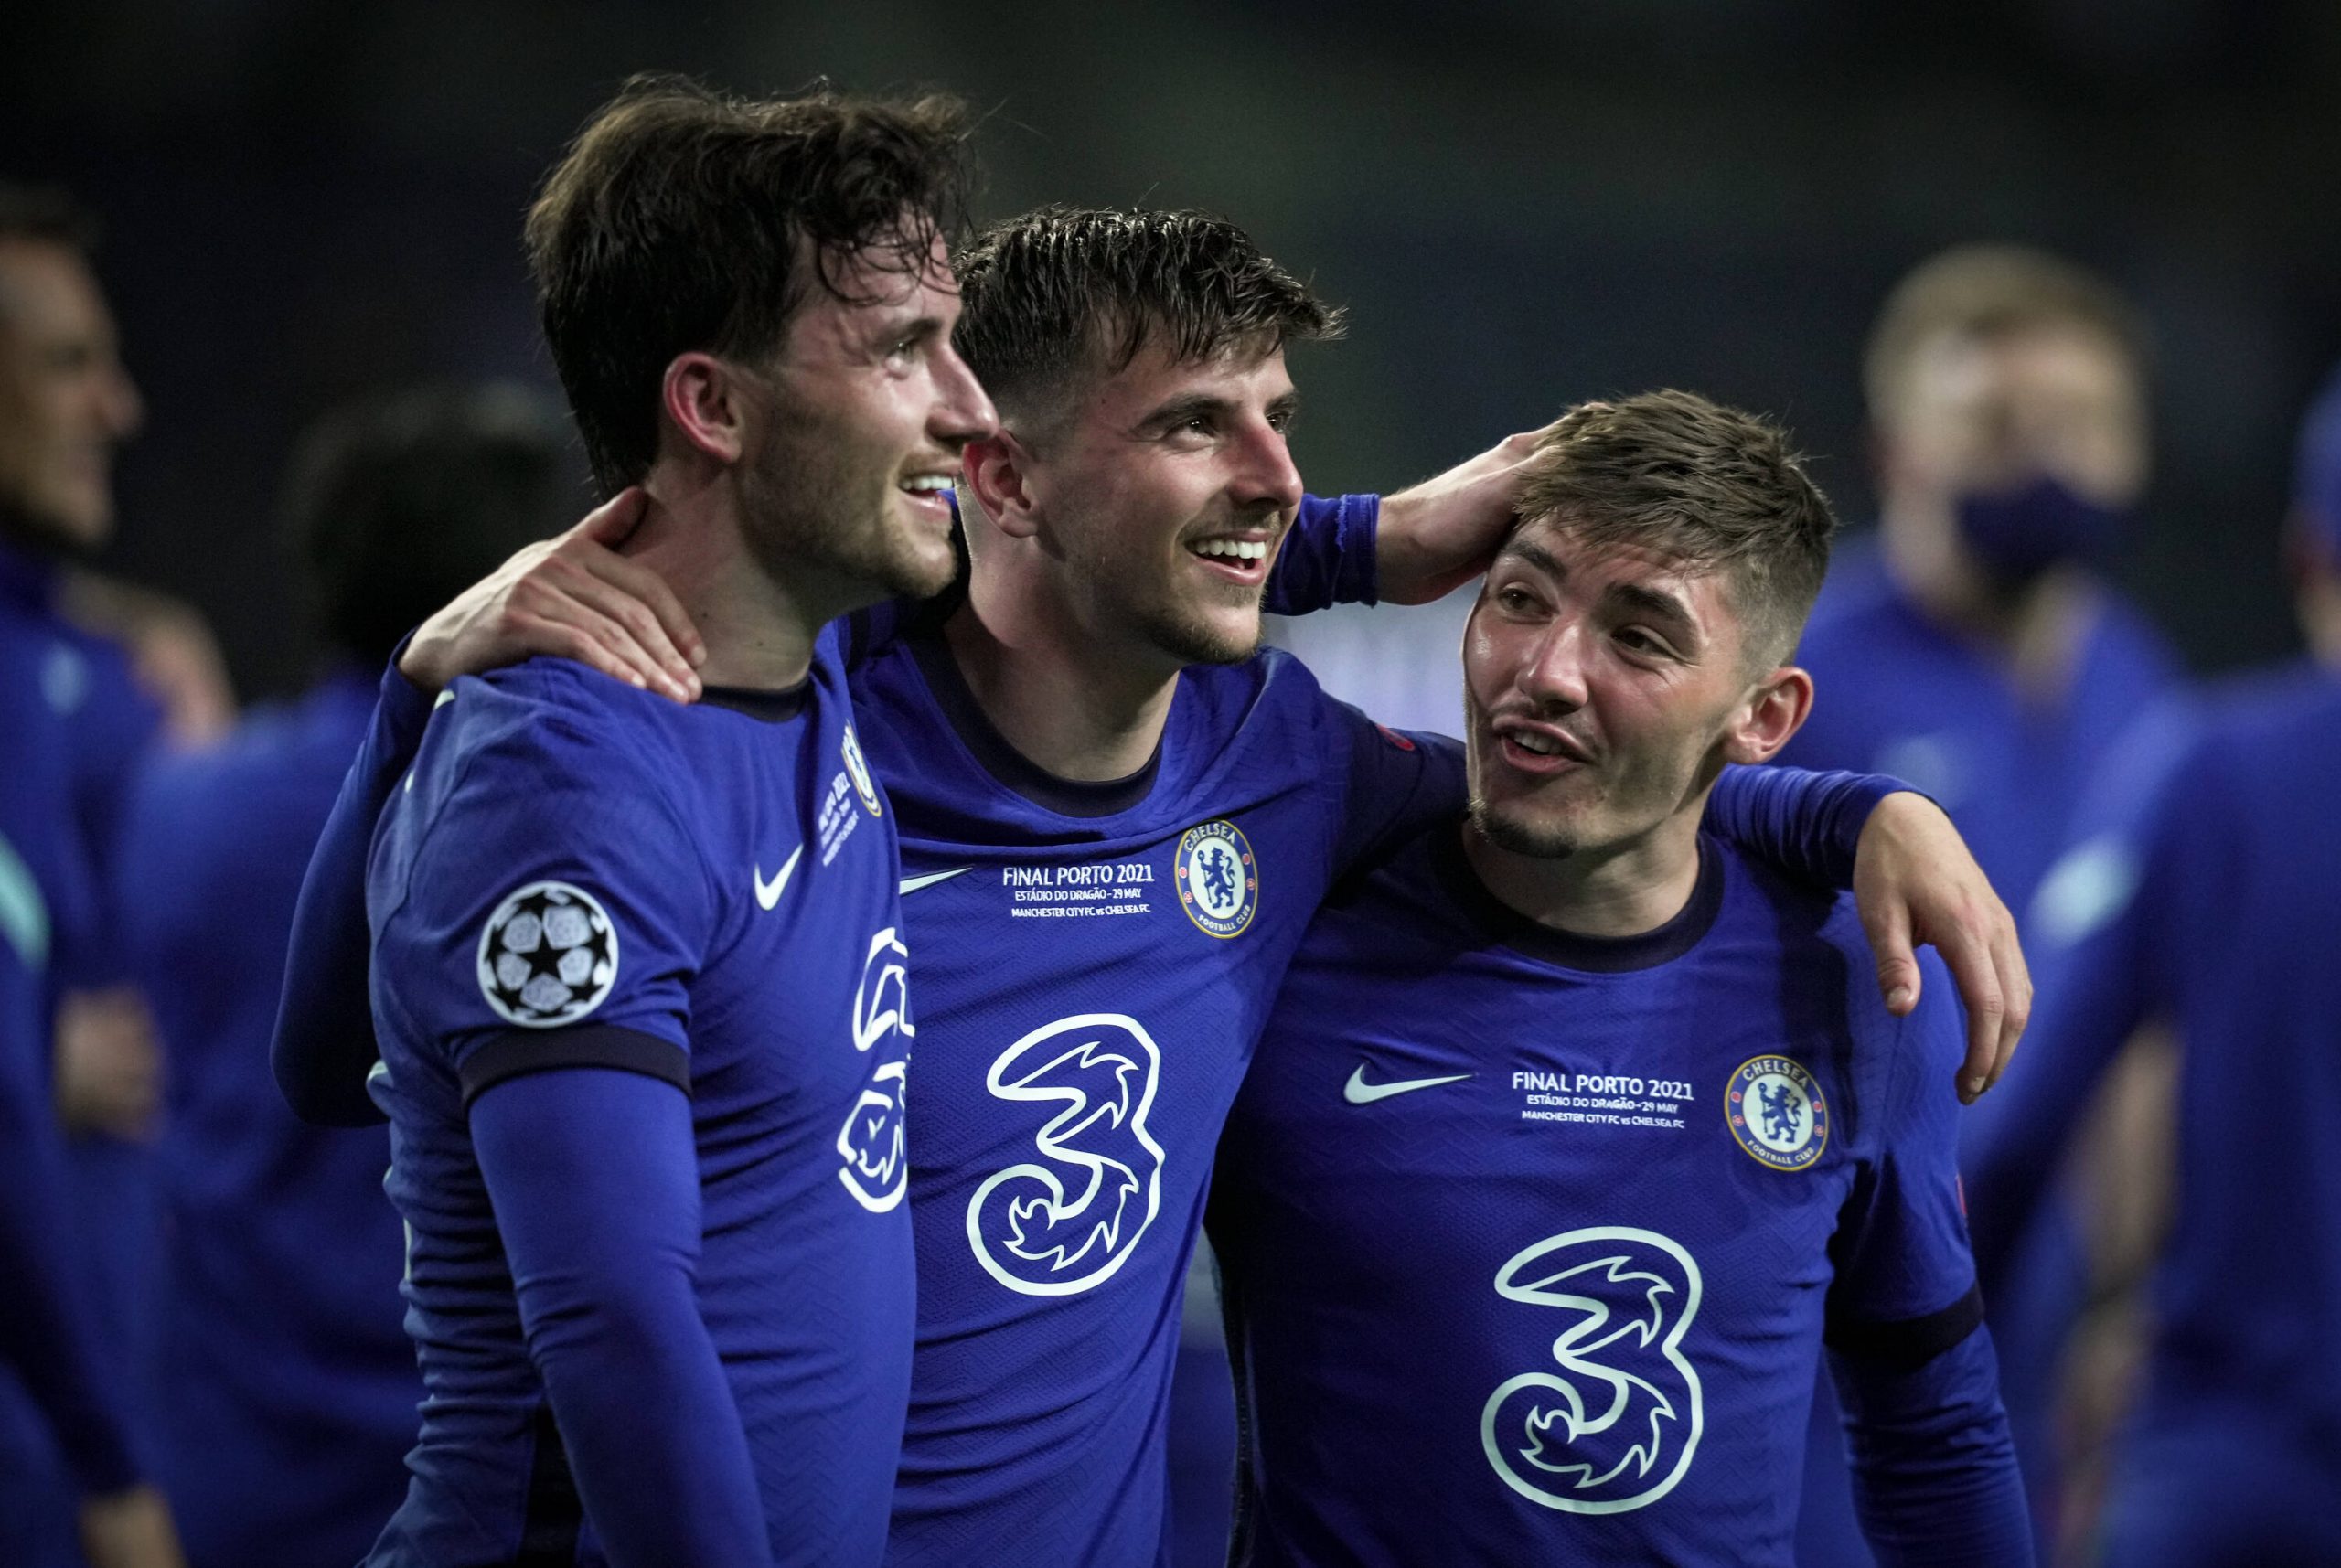 Chelsea exercise the option to extend Billy Gilmour’s contract  until 2024.